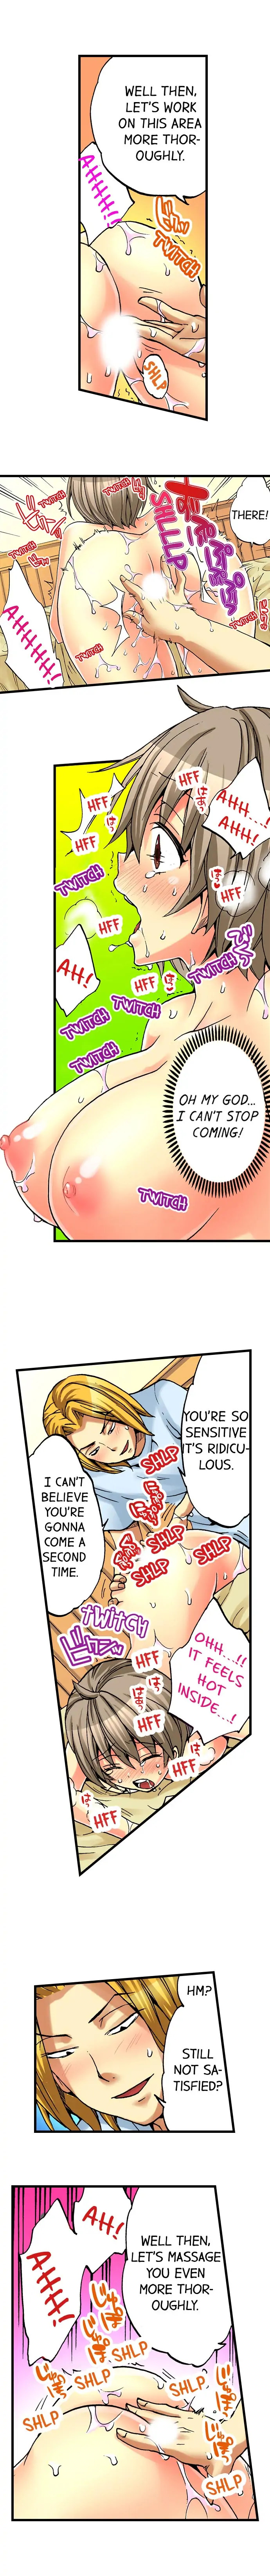 I Have a Girl’s Body and I Can’t Stop Cumming!! - Chapter 10 Page 5